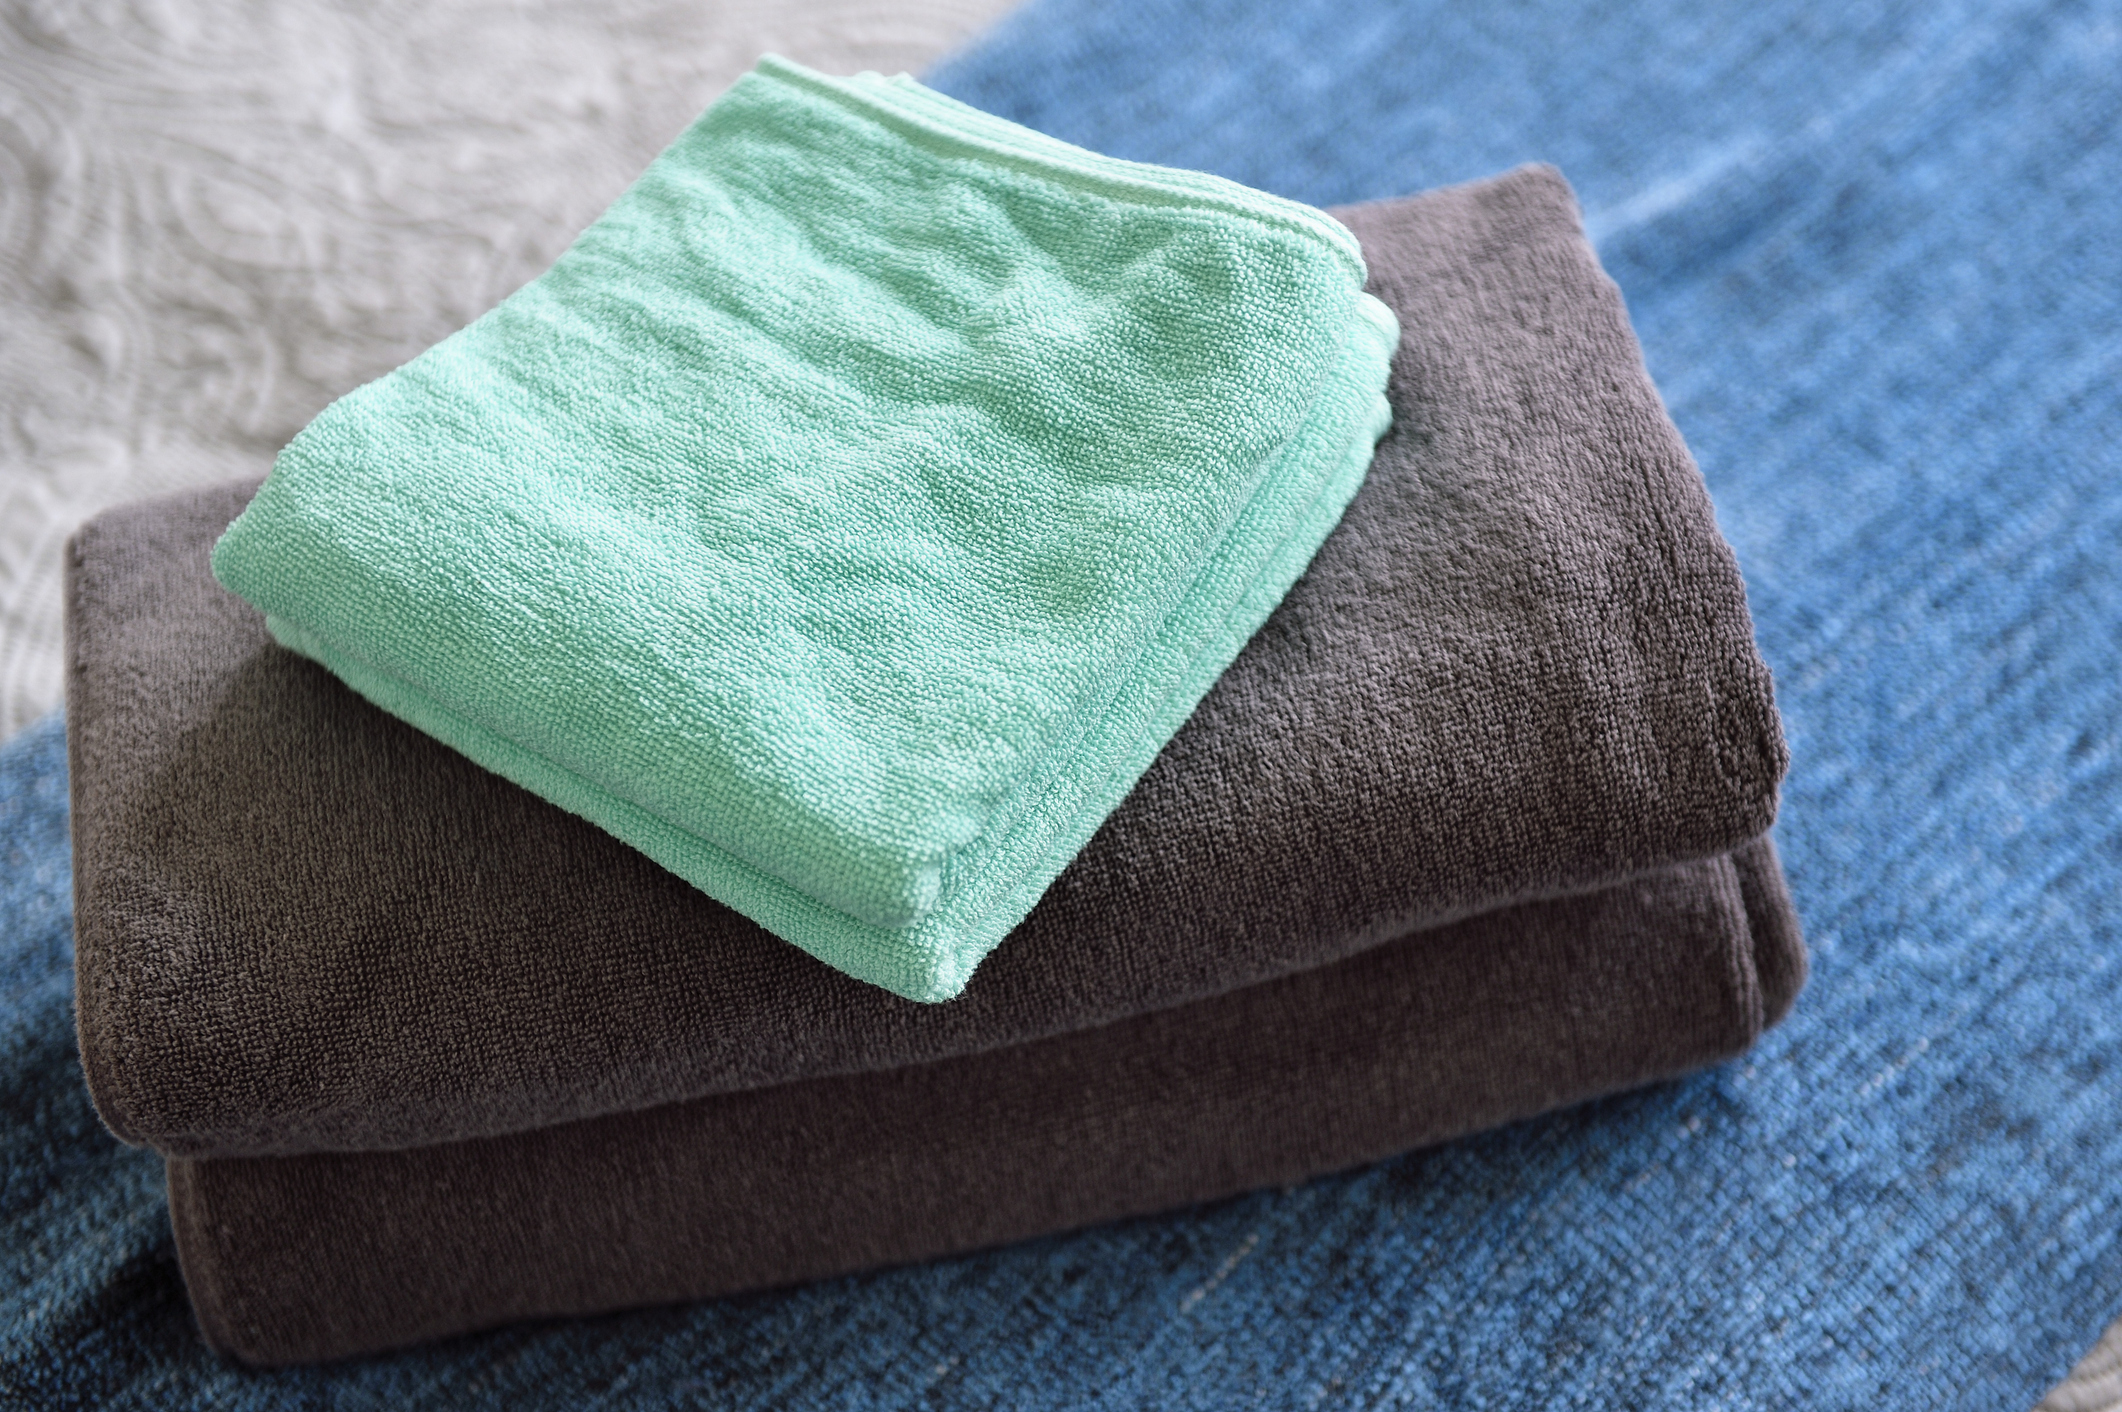 Stacked towels with a folded turquoise towel on top of two folded grey towels, placed on a blue surface